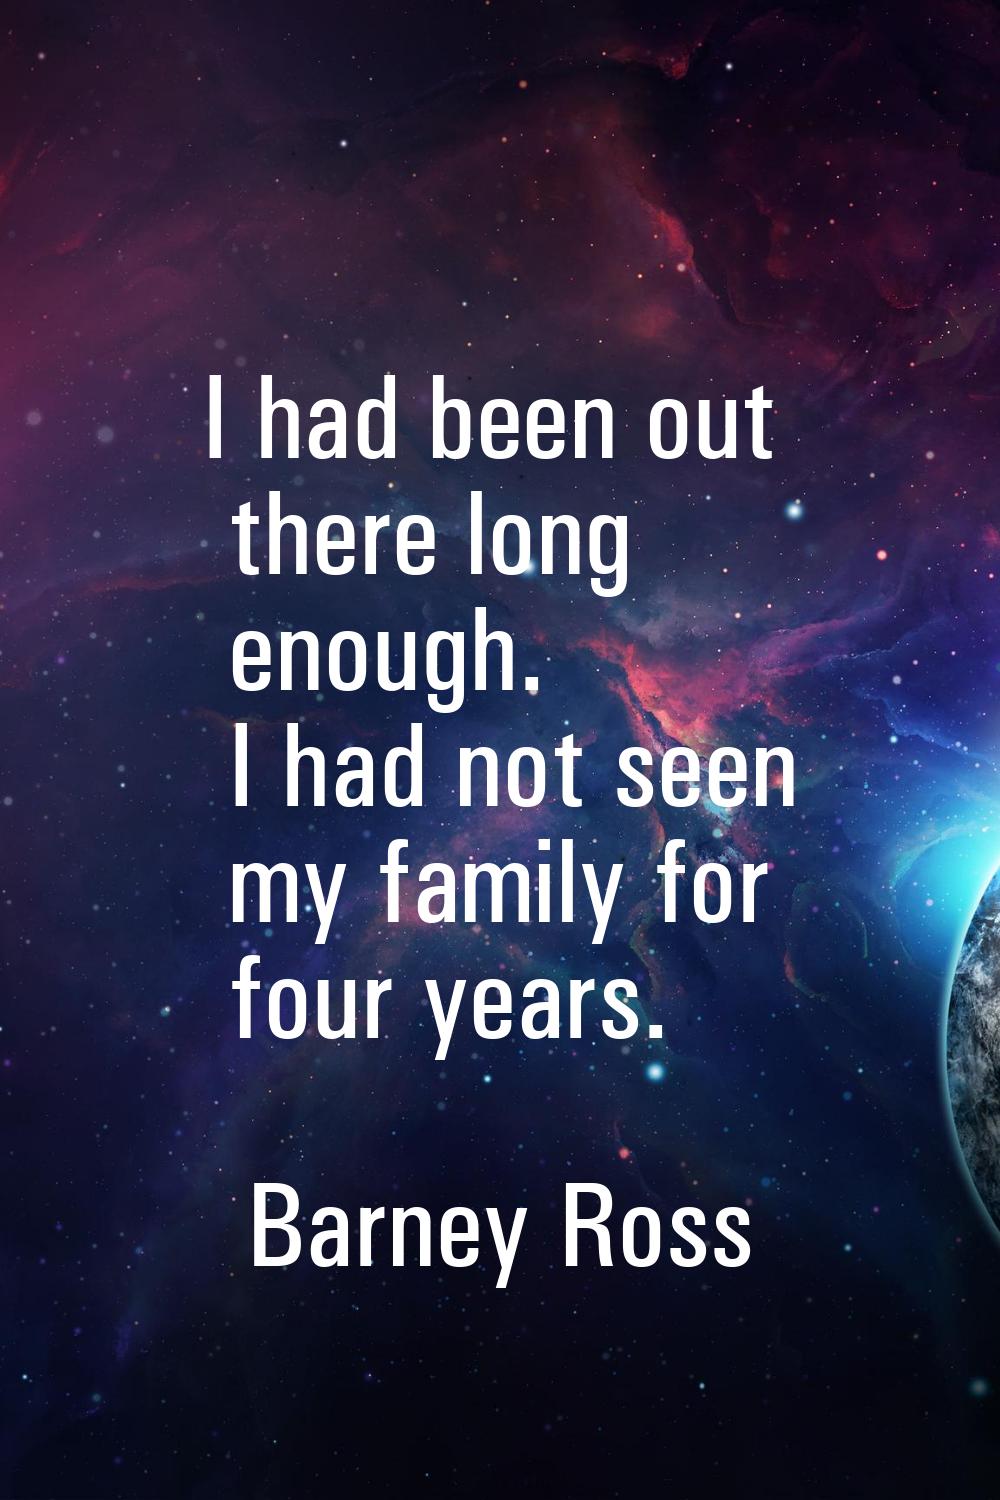 I had been out there long enough. I had not seen my family for four years.